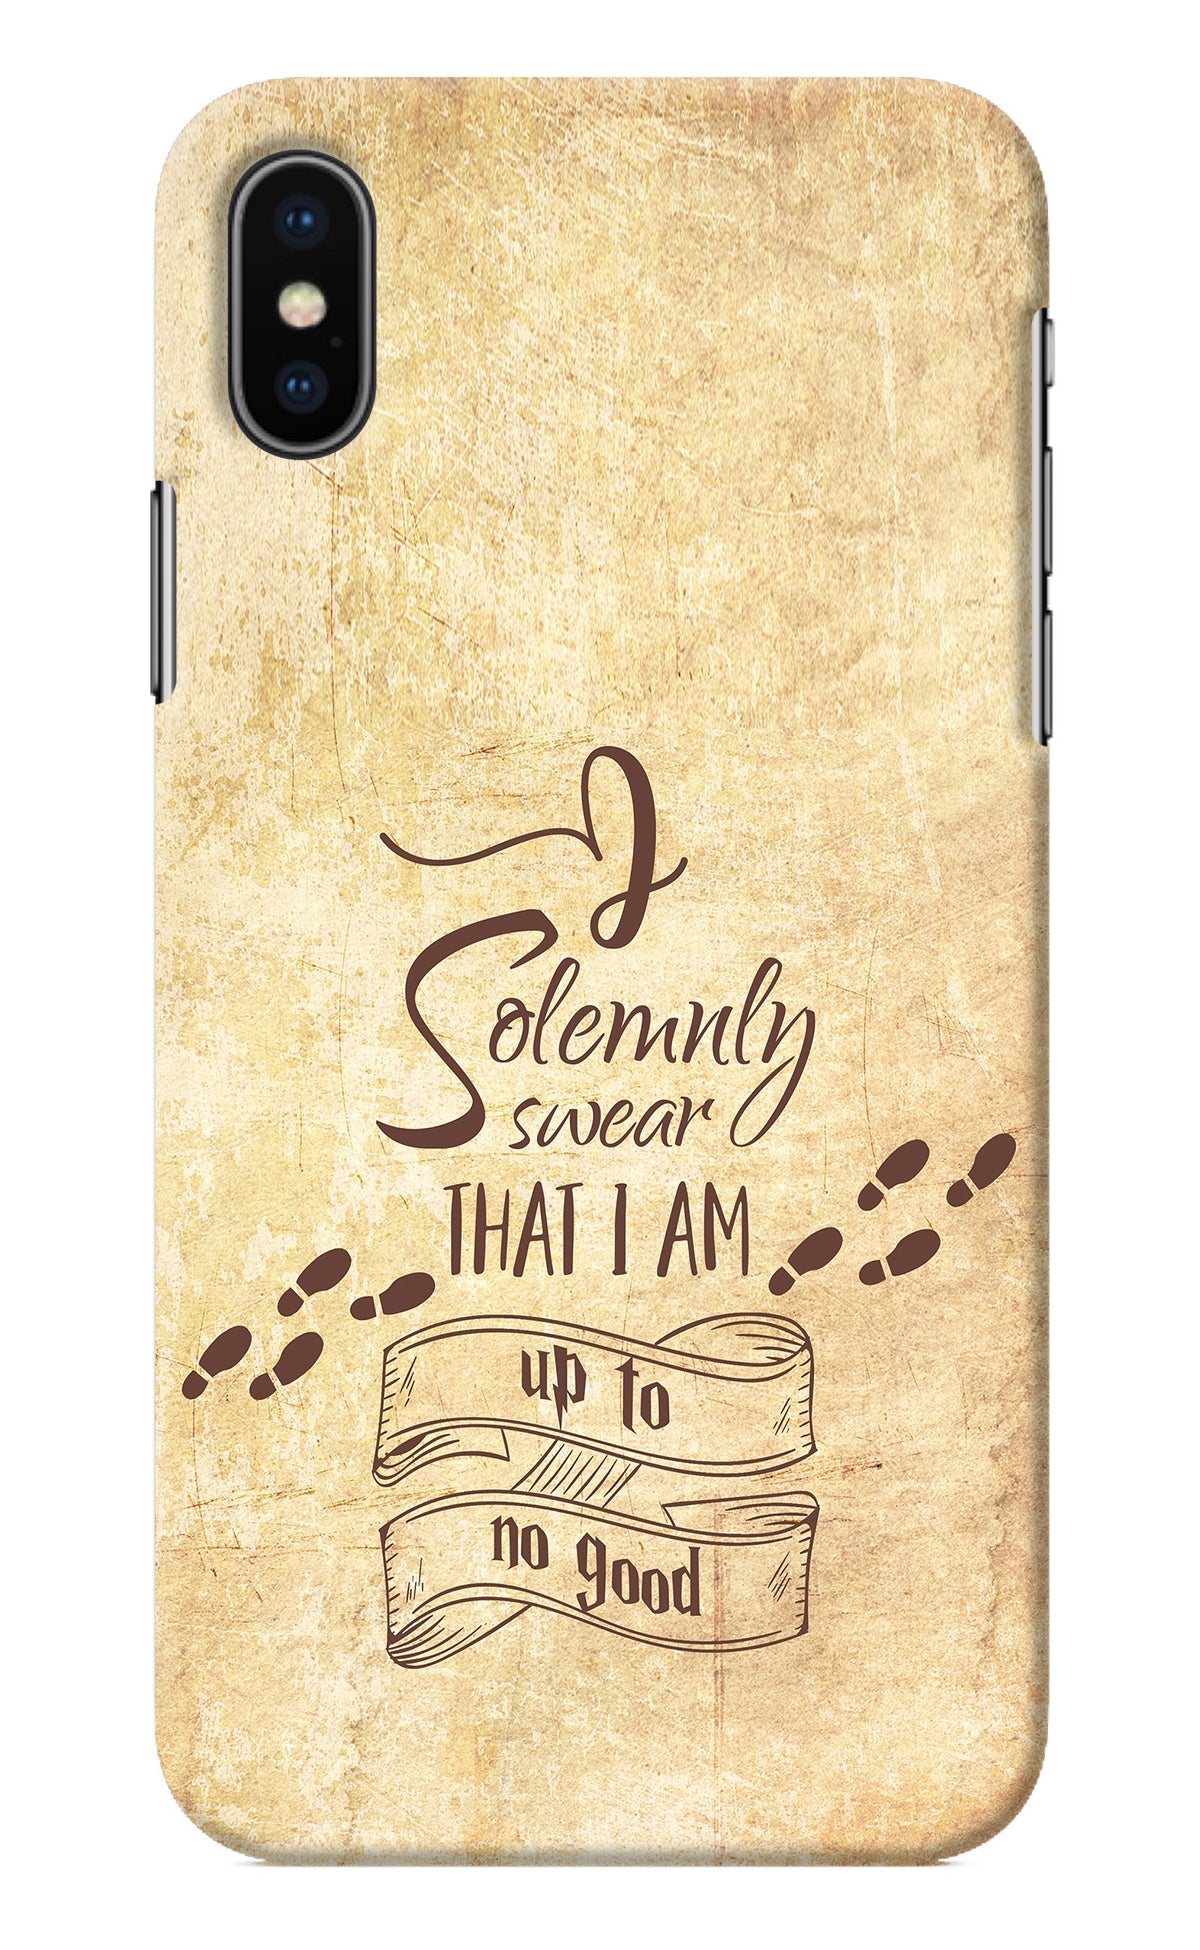 I Solemnly swear that i up to no good iPhone X Back Cover